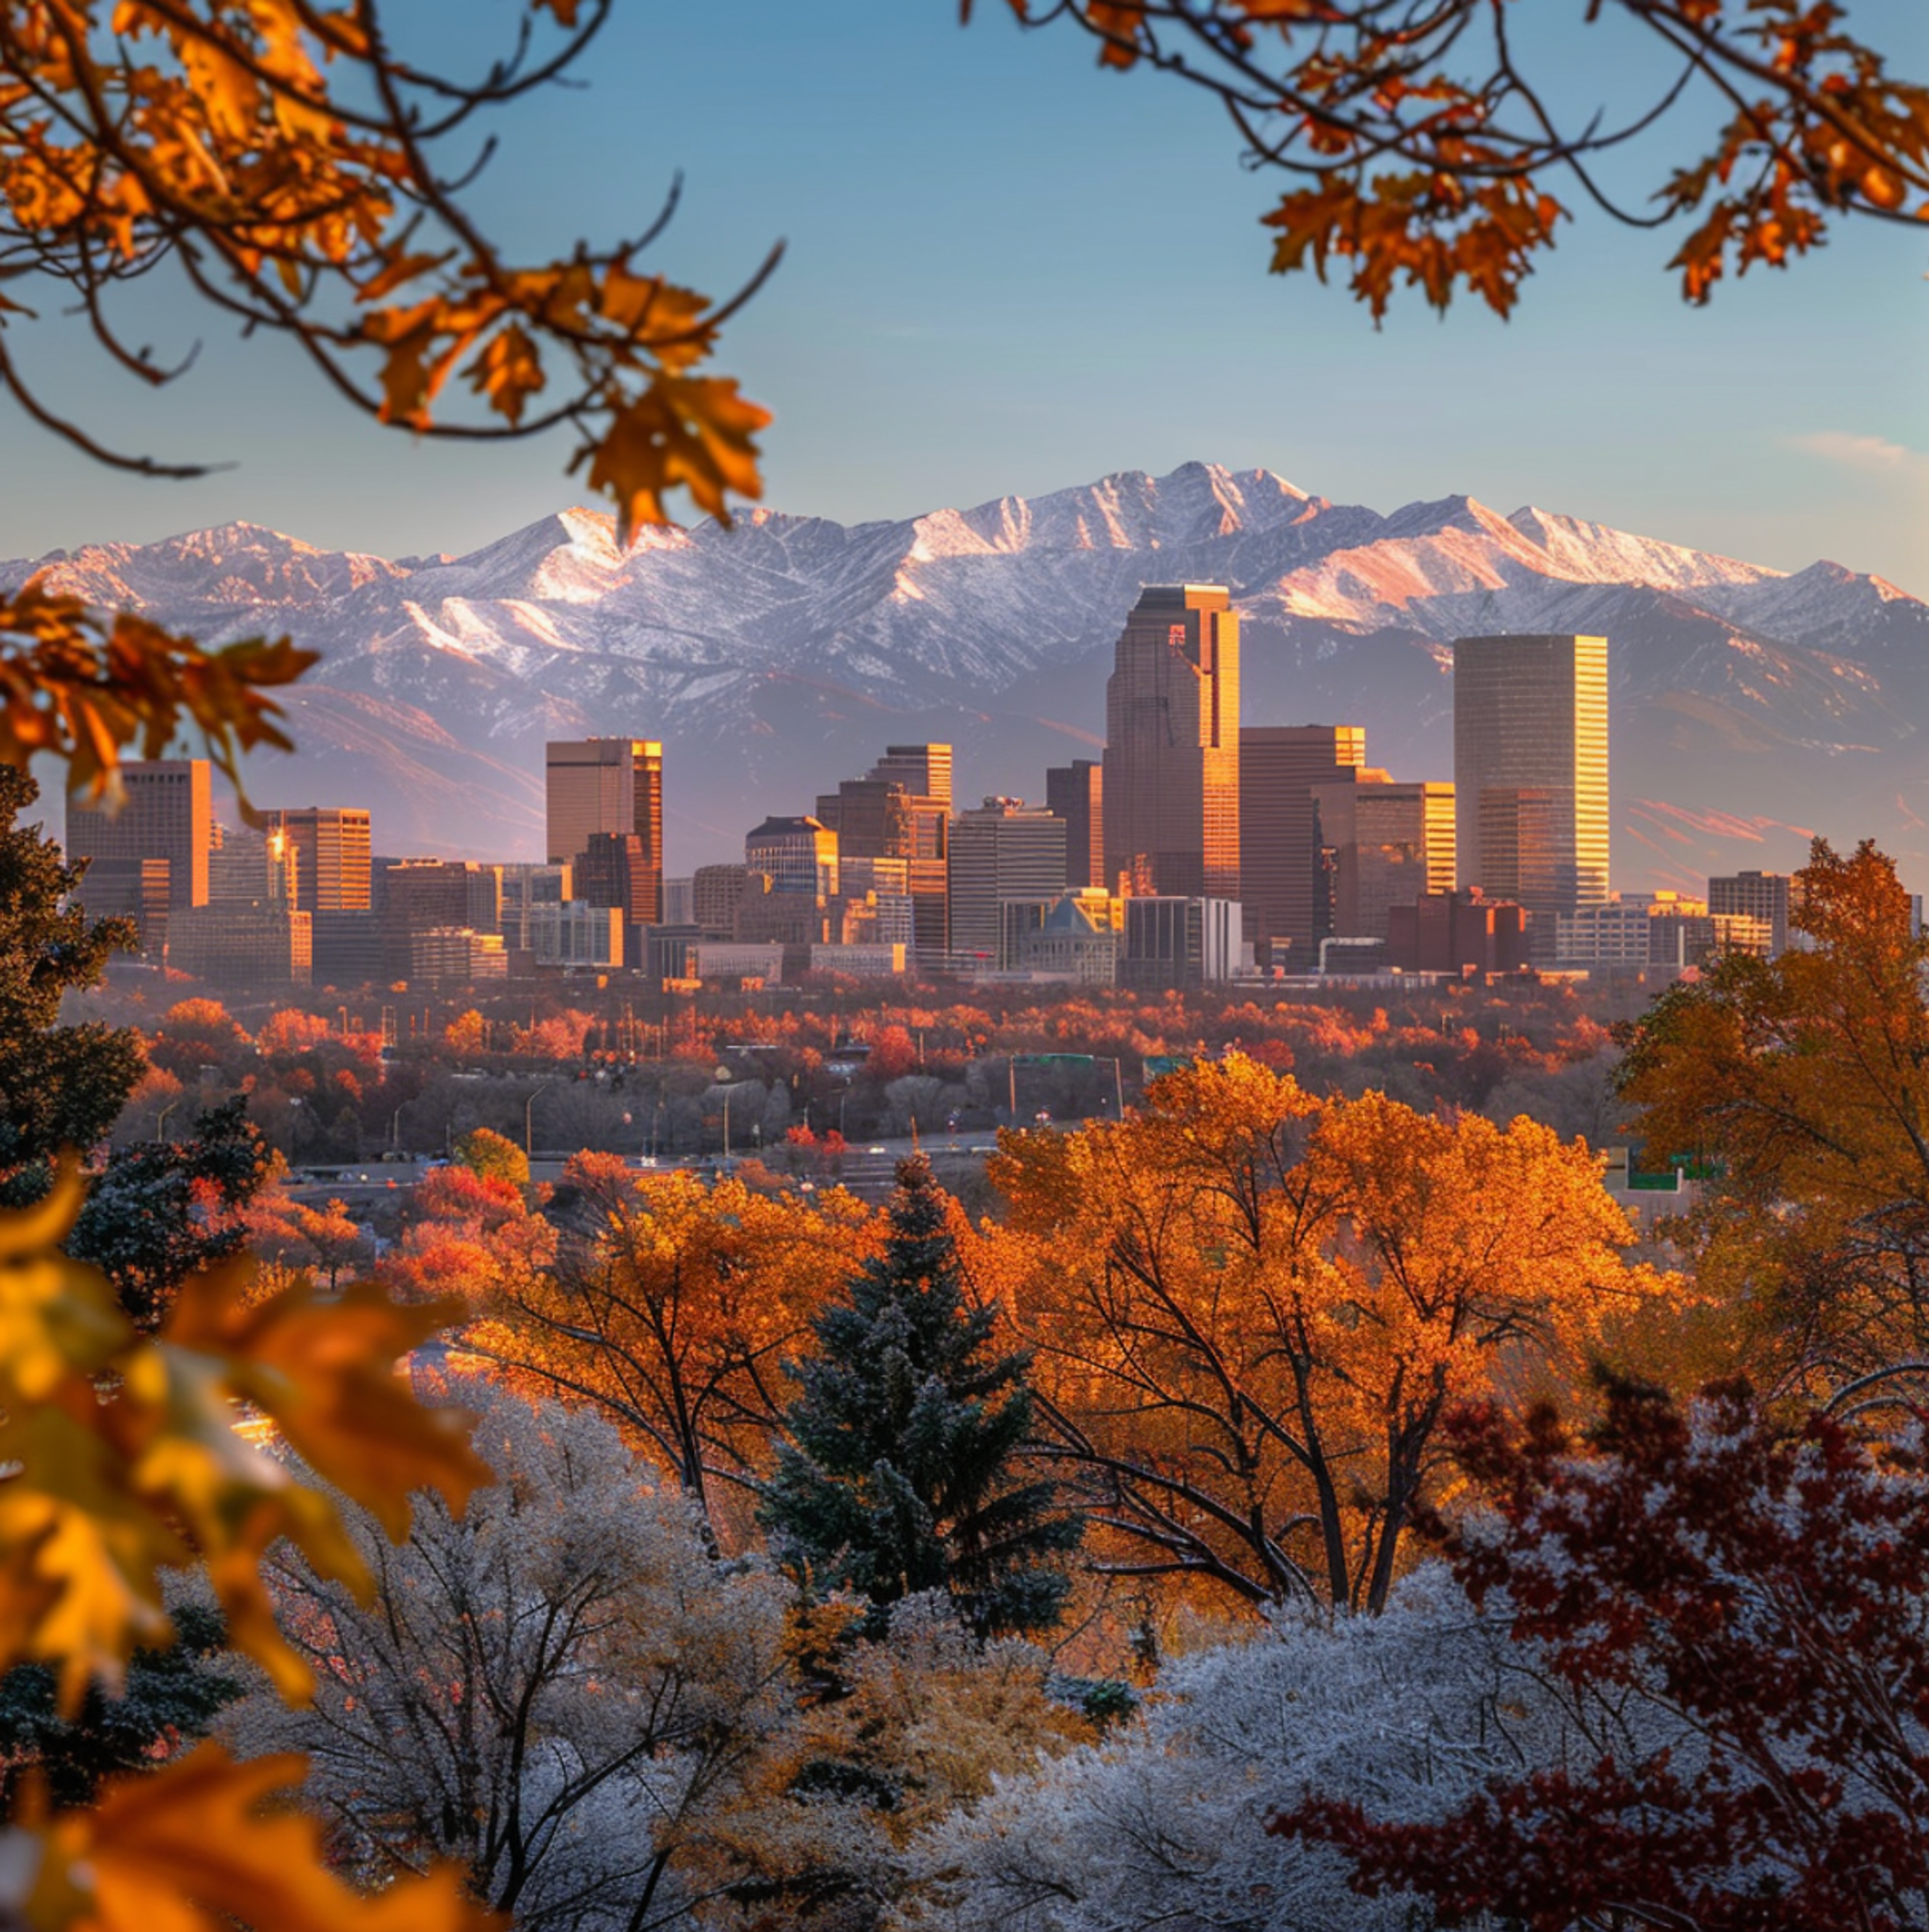 Autumnal view of Denver, Colorado skyline with vibrant orange and yellow foliage in the foreground and the majestic snow-capped Rocky Mountains in the background, symbolizing the natural beauty and urban balance of Denver.